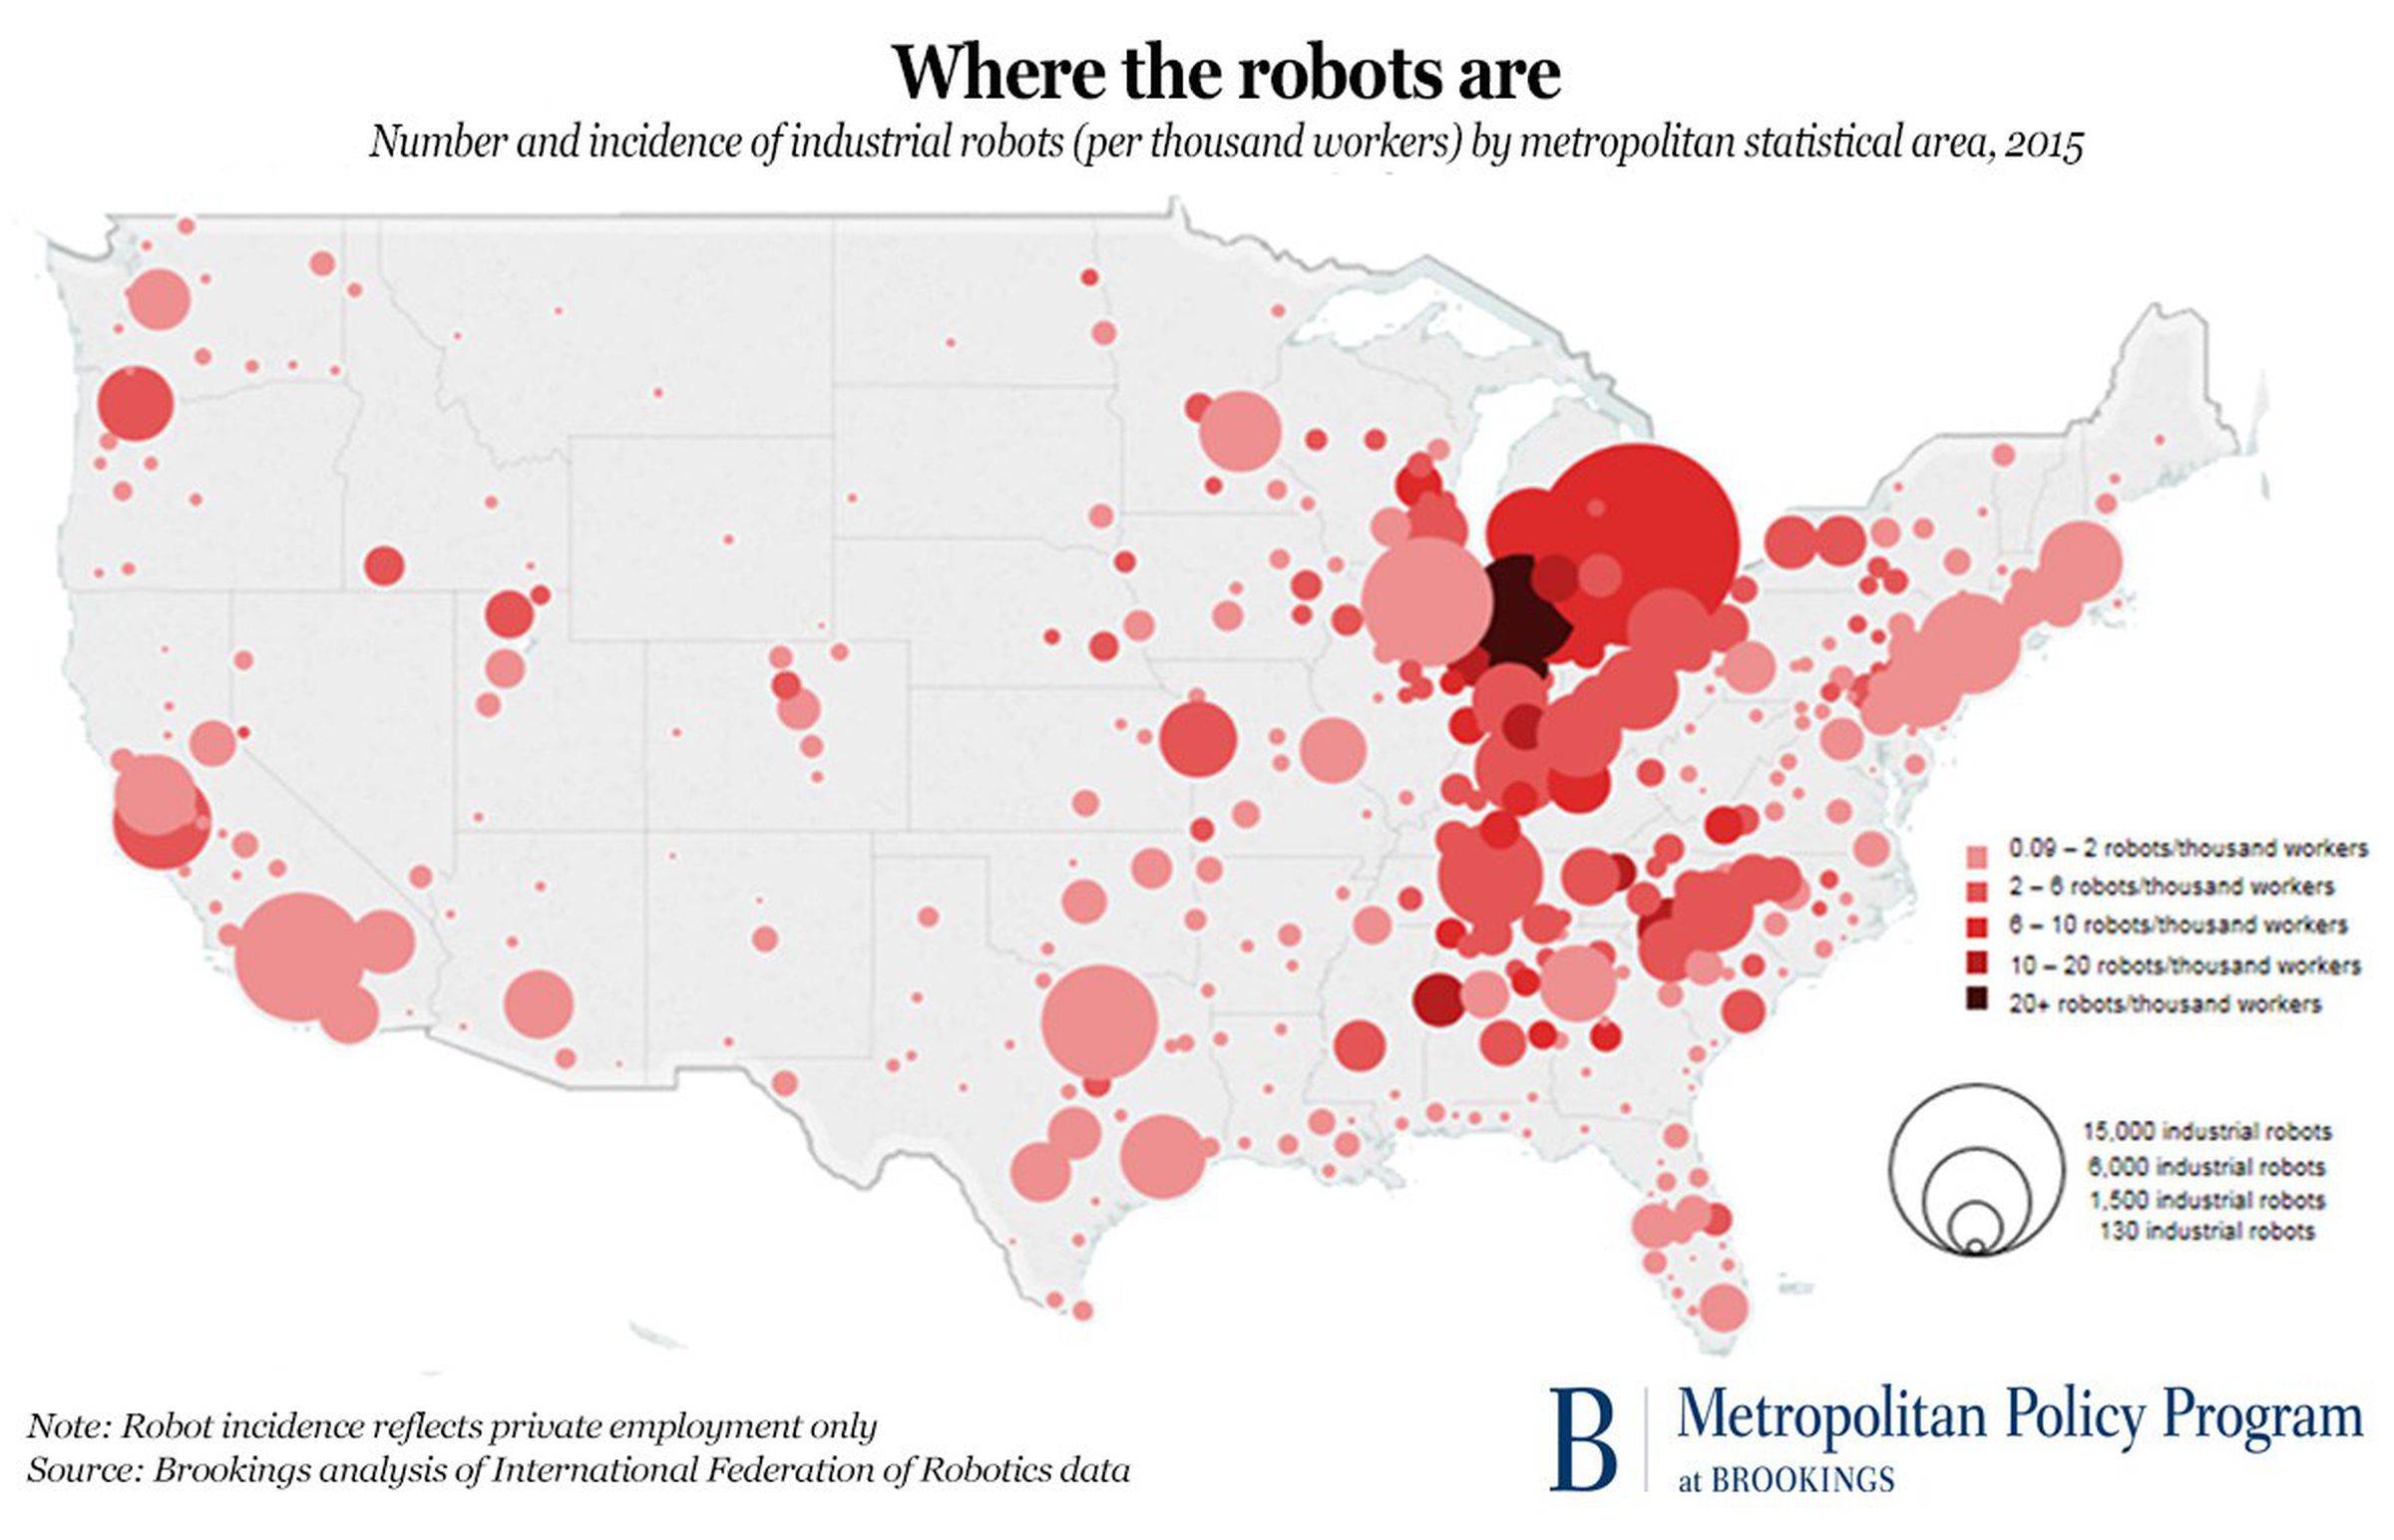 Industrial robots in the US are mainly used in the Midwest and upper South